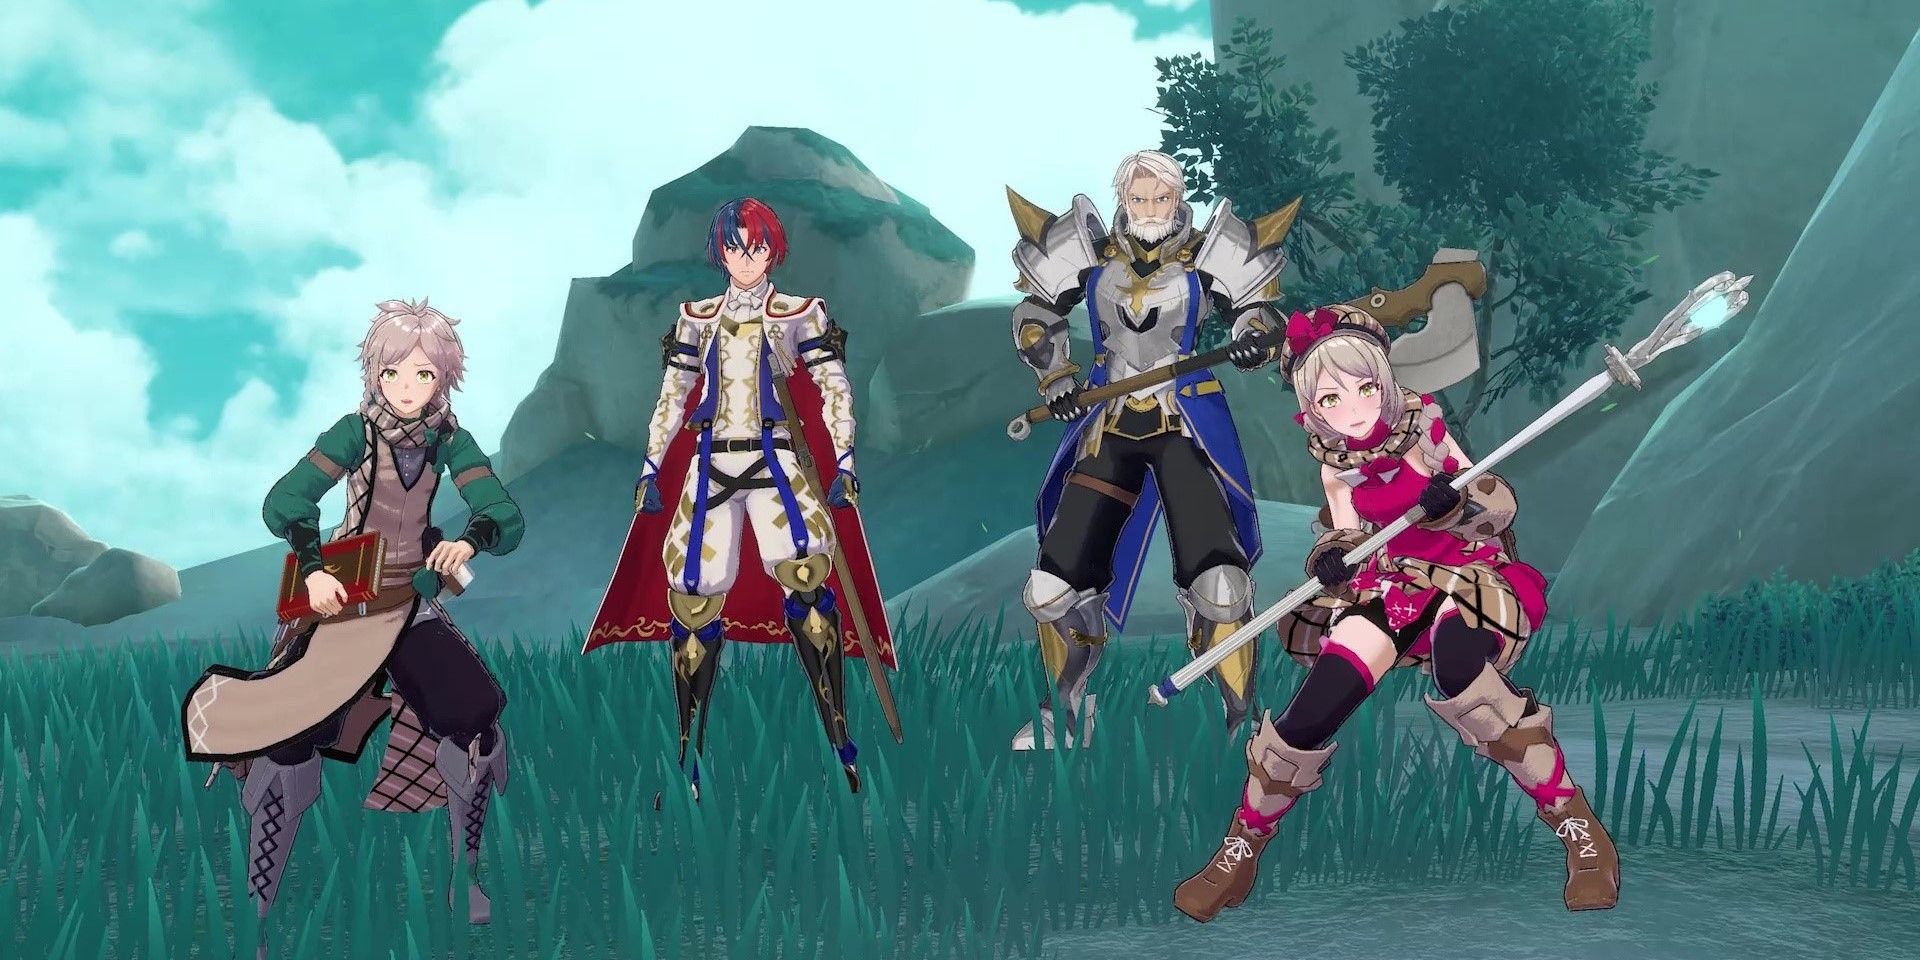 Alear, Vander, Clan, and Flamme from the FE Engage Premiere Trailer